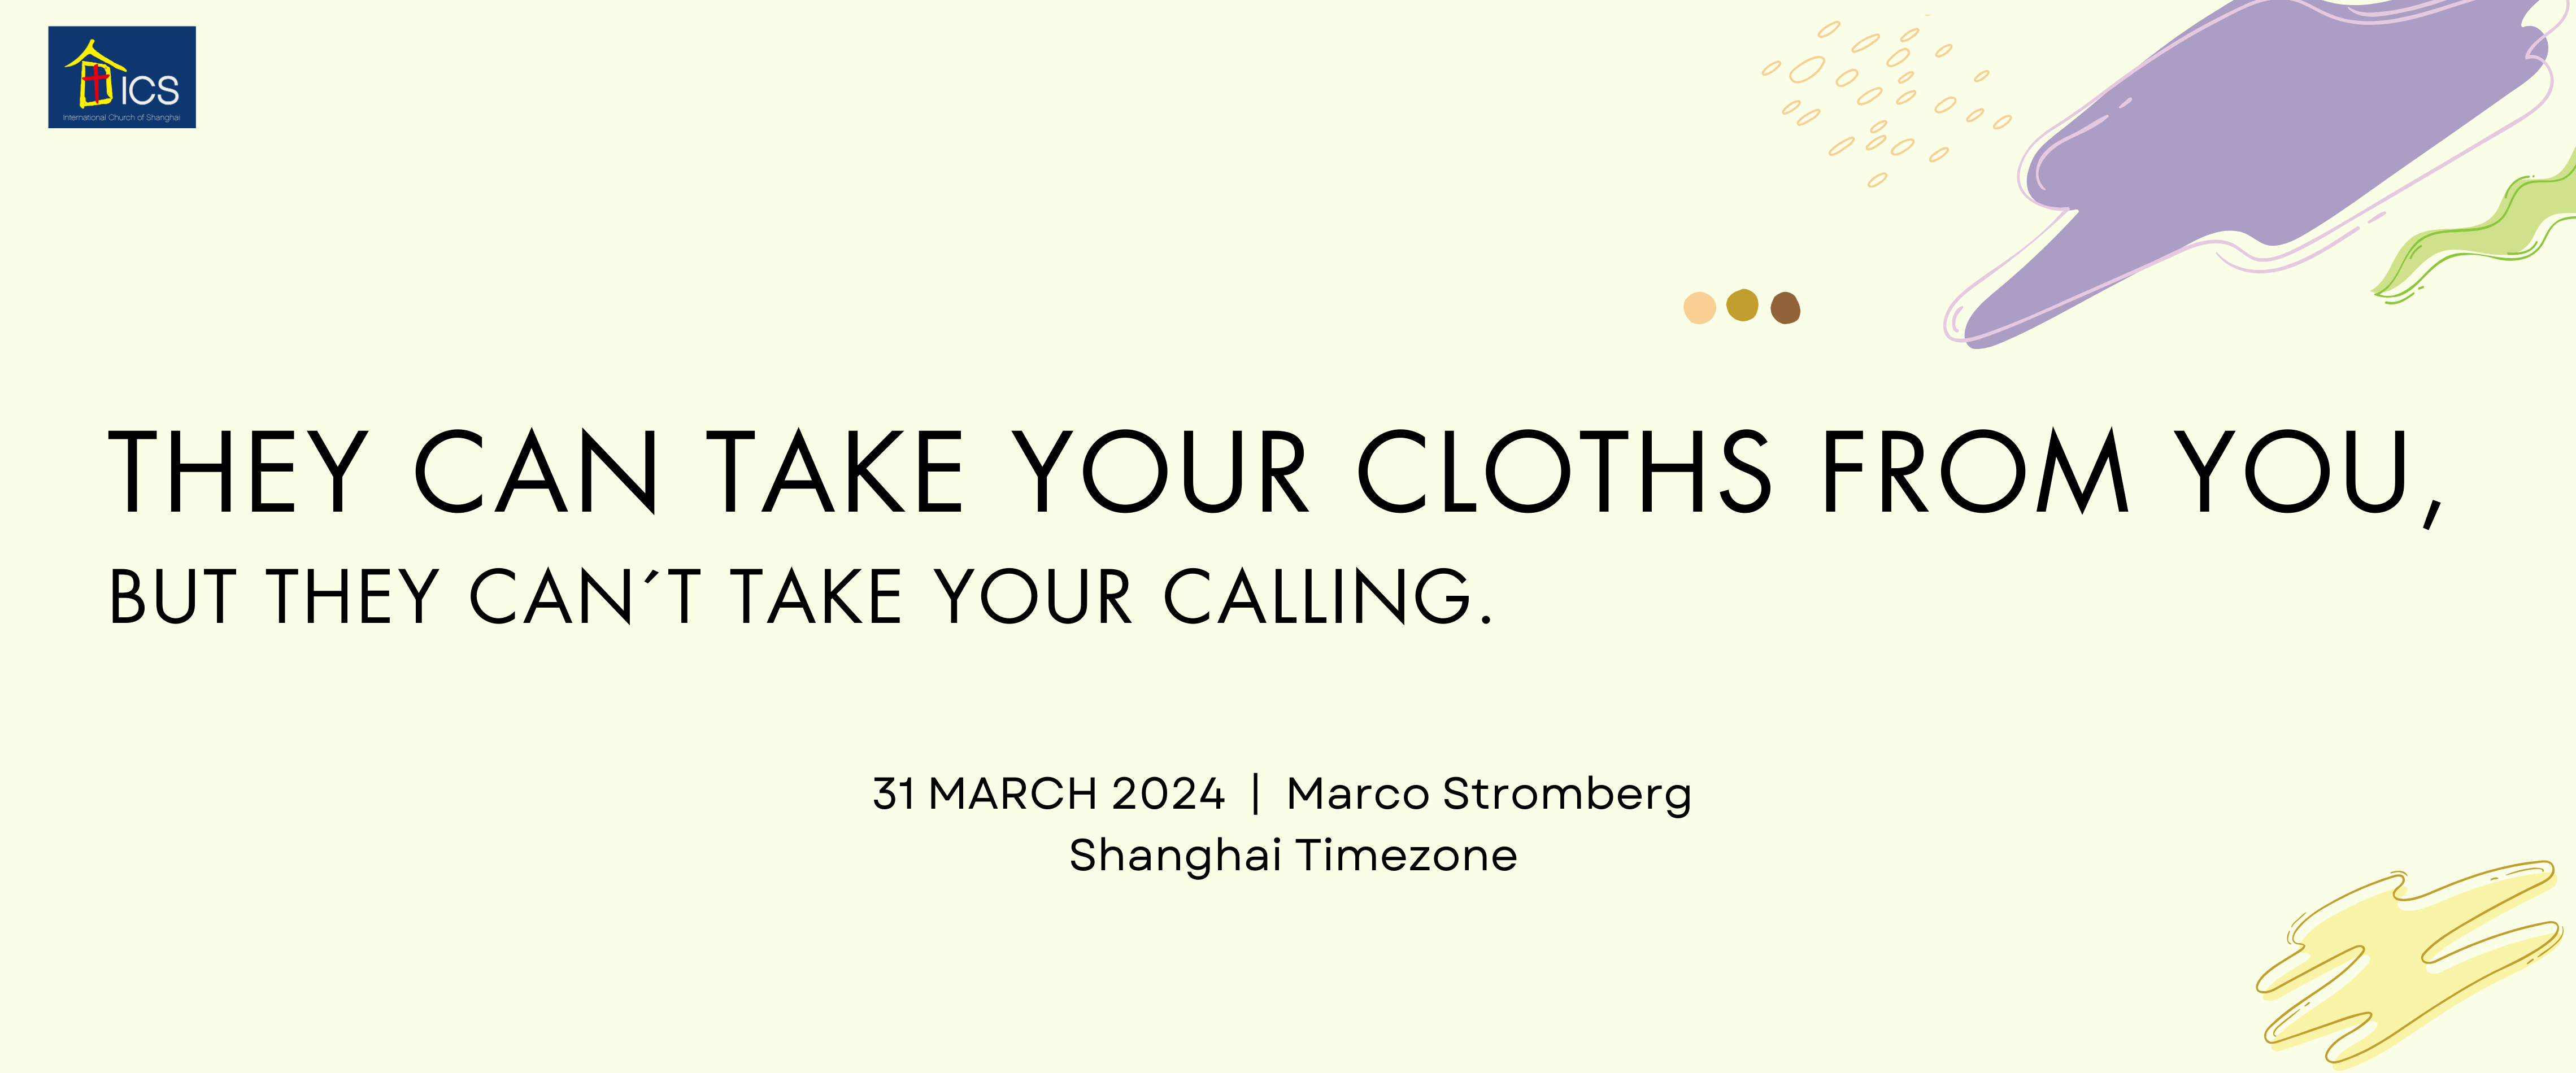 They Can Take Your Clothes from You, but Not Your Calling!